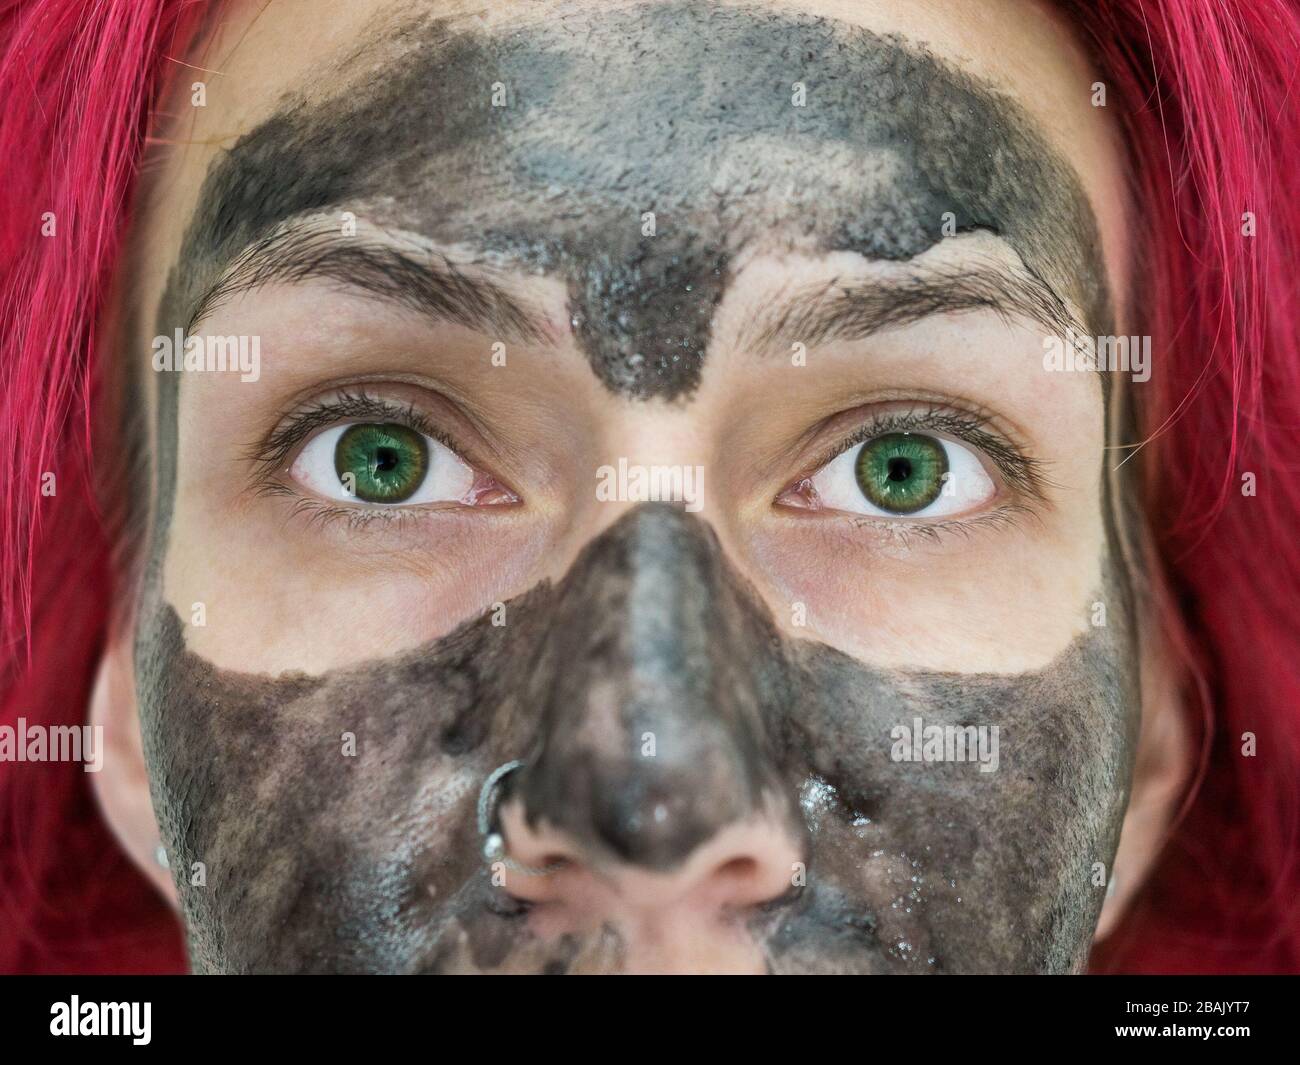 Close-up photo of a fragment of the face of a girl with bright green eyes, red hair and black peel off mask on her face Stock Photo